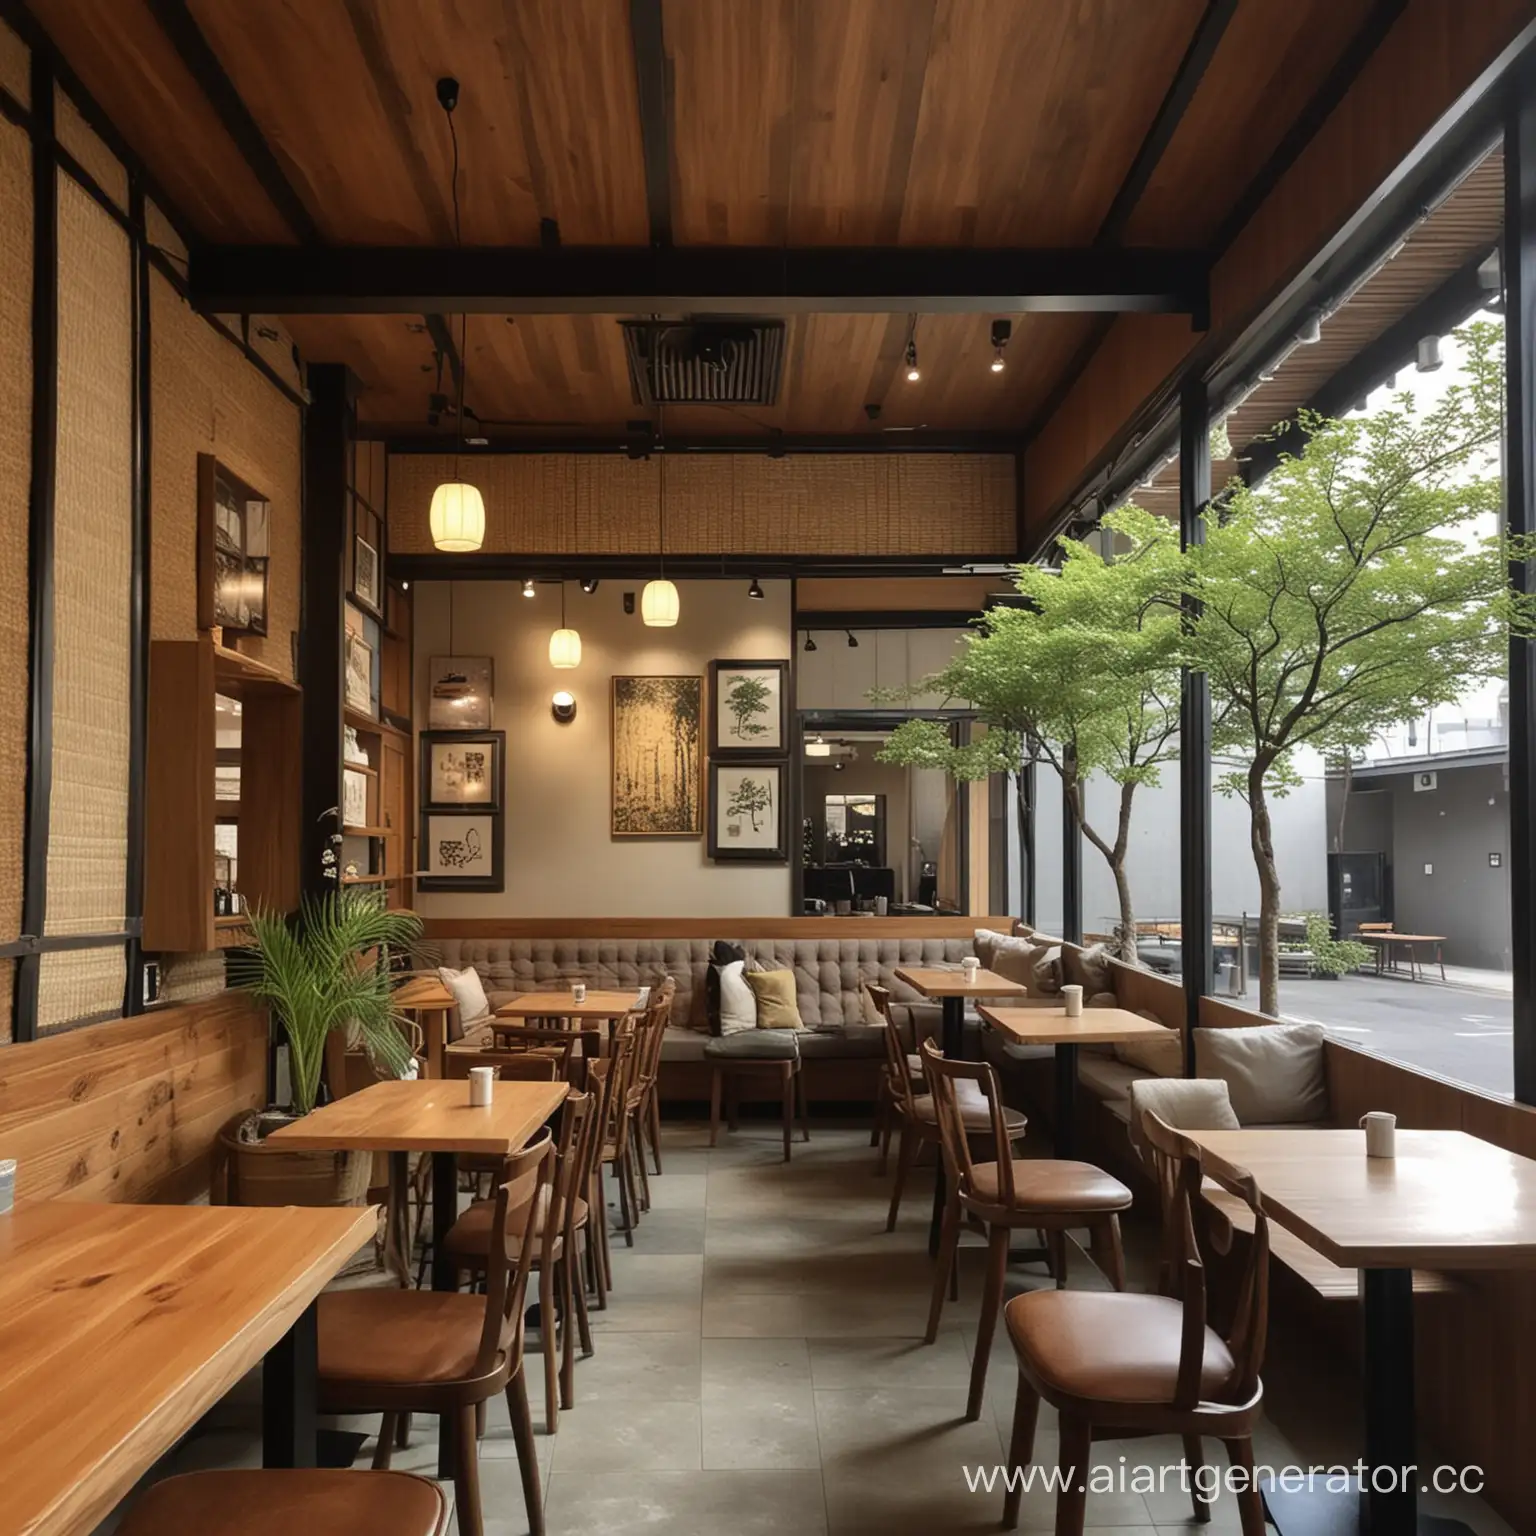 JapaneseThemed-Cafe-Interior-with-Traditional-Decor-and-Modern-Twist